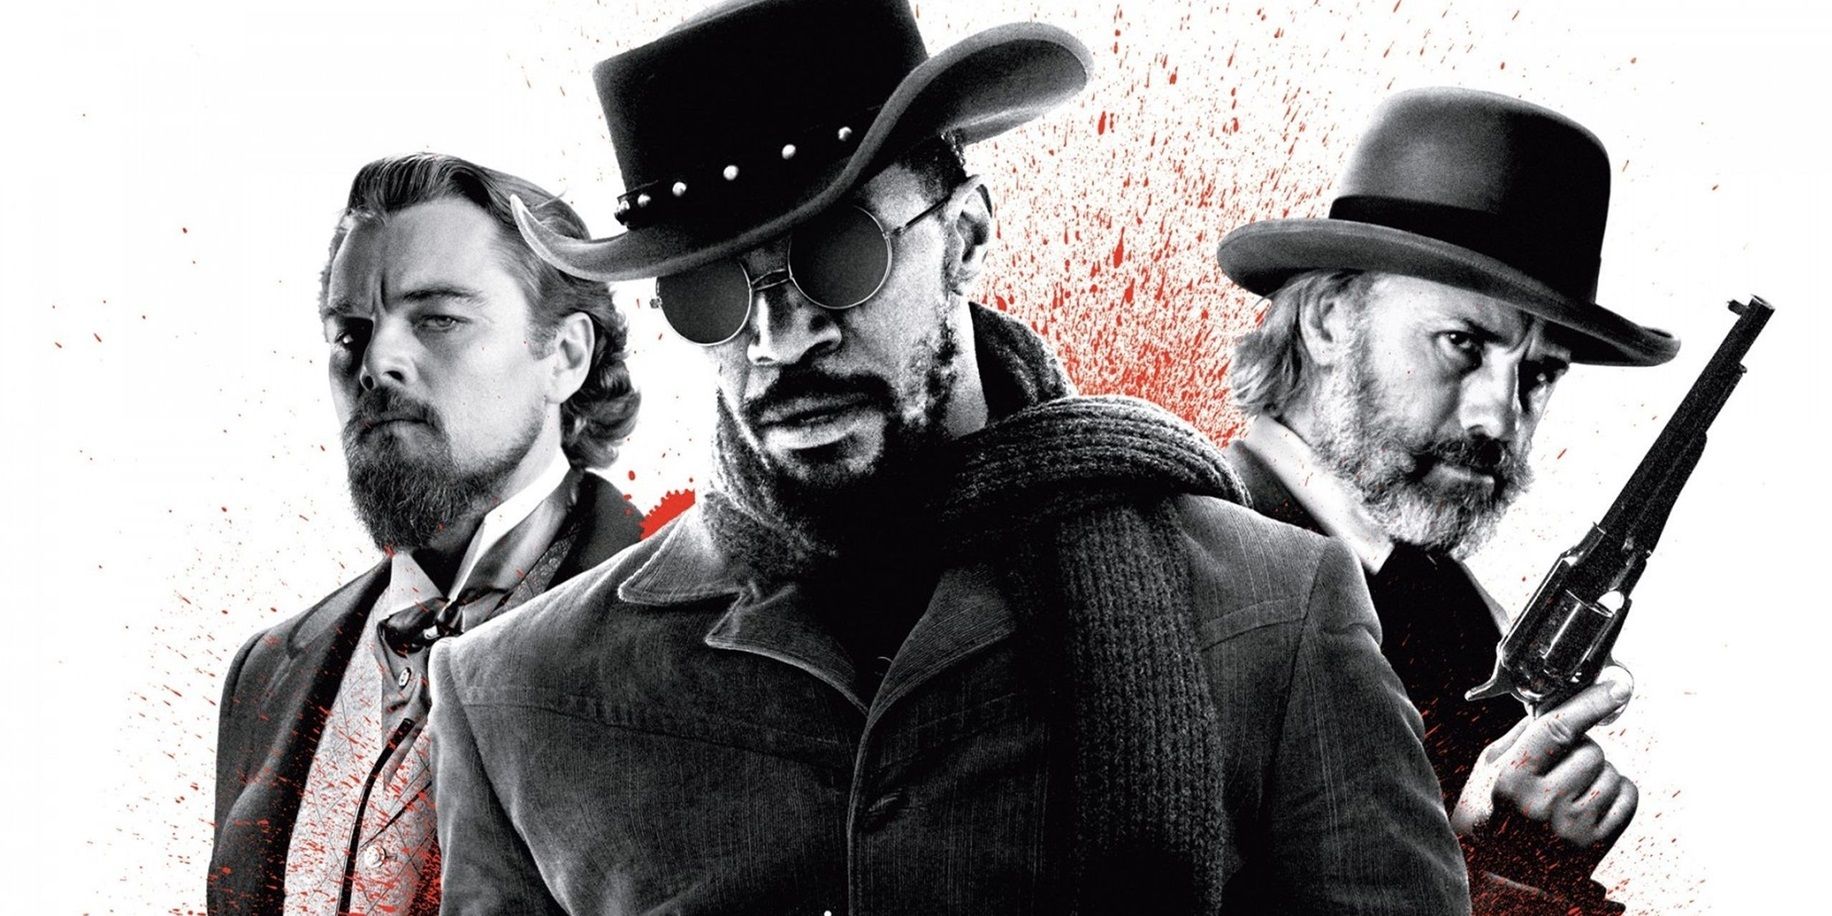 The poster for Django Unchained